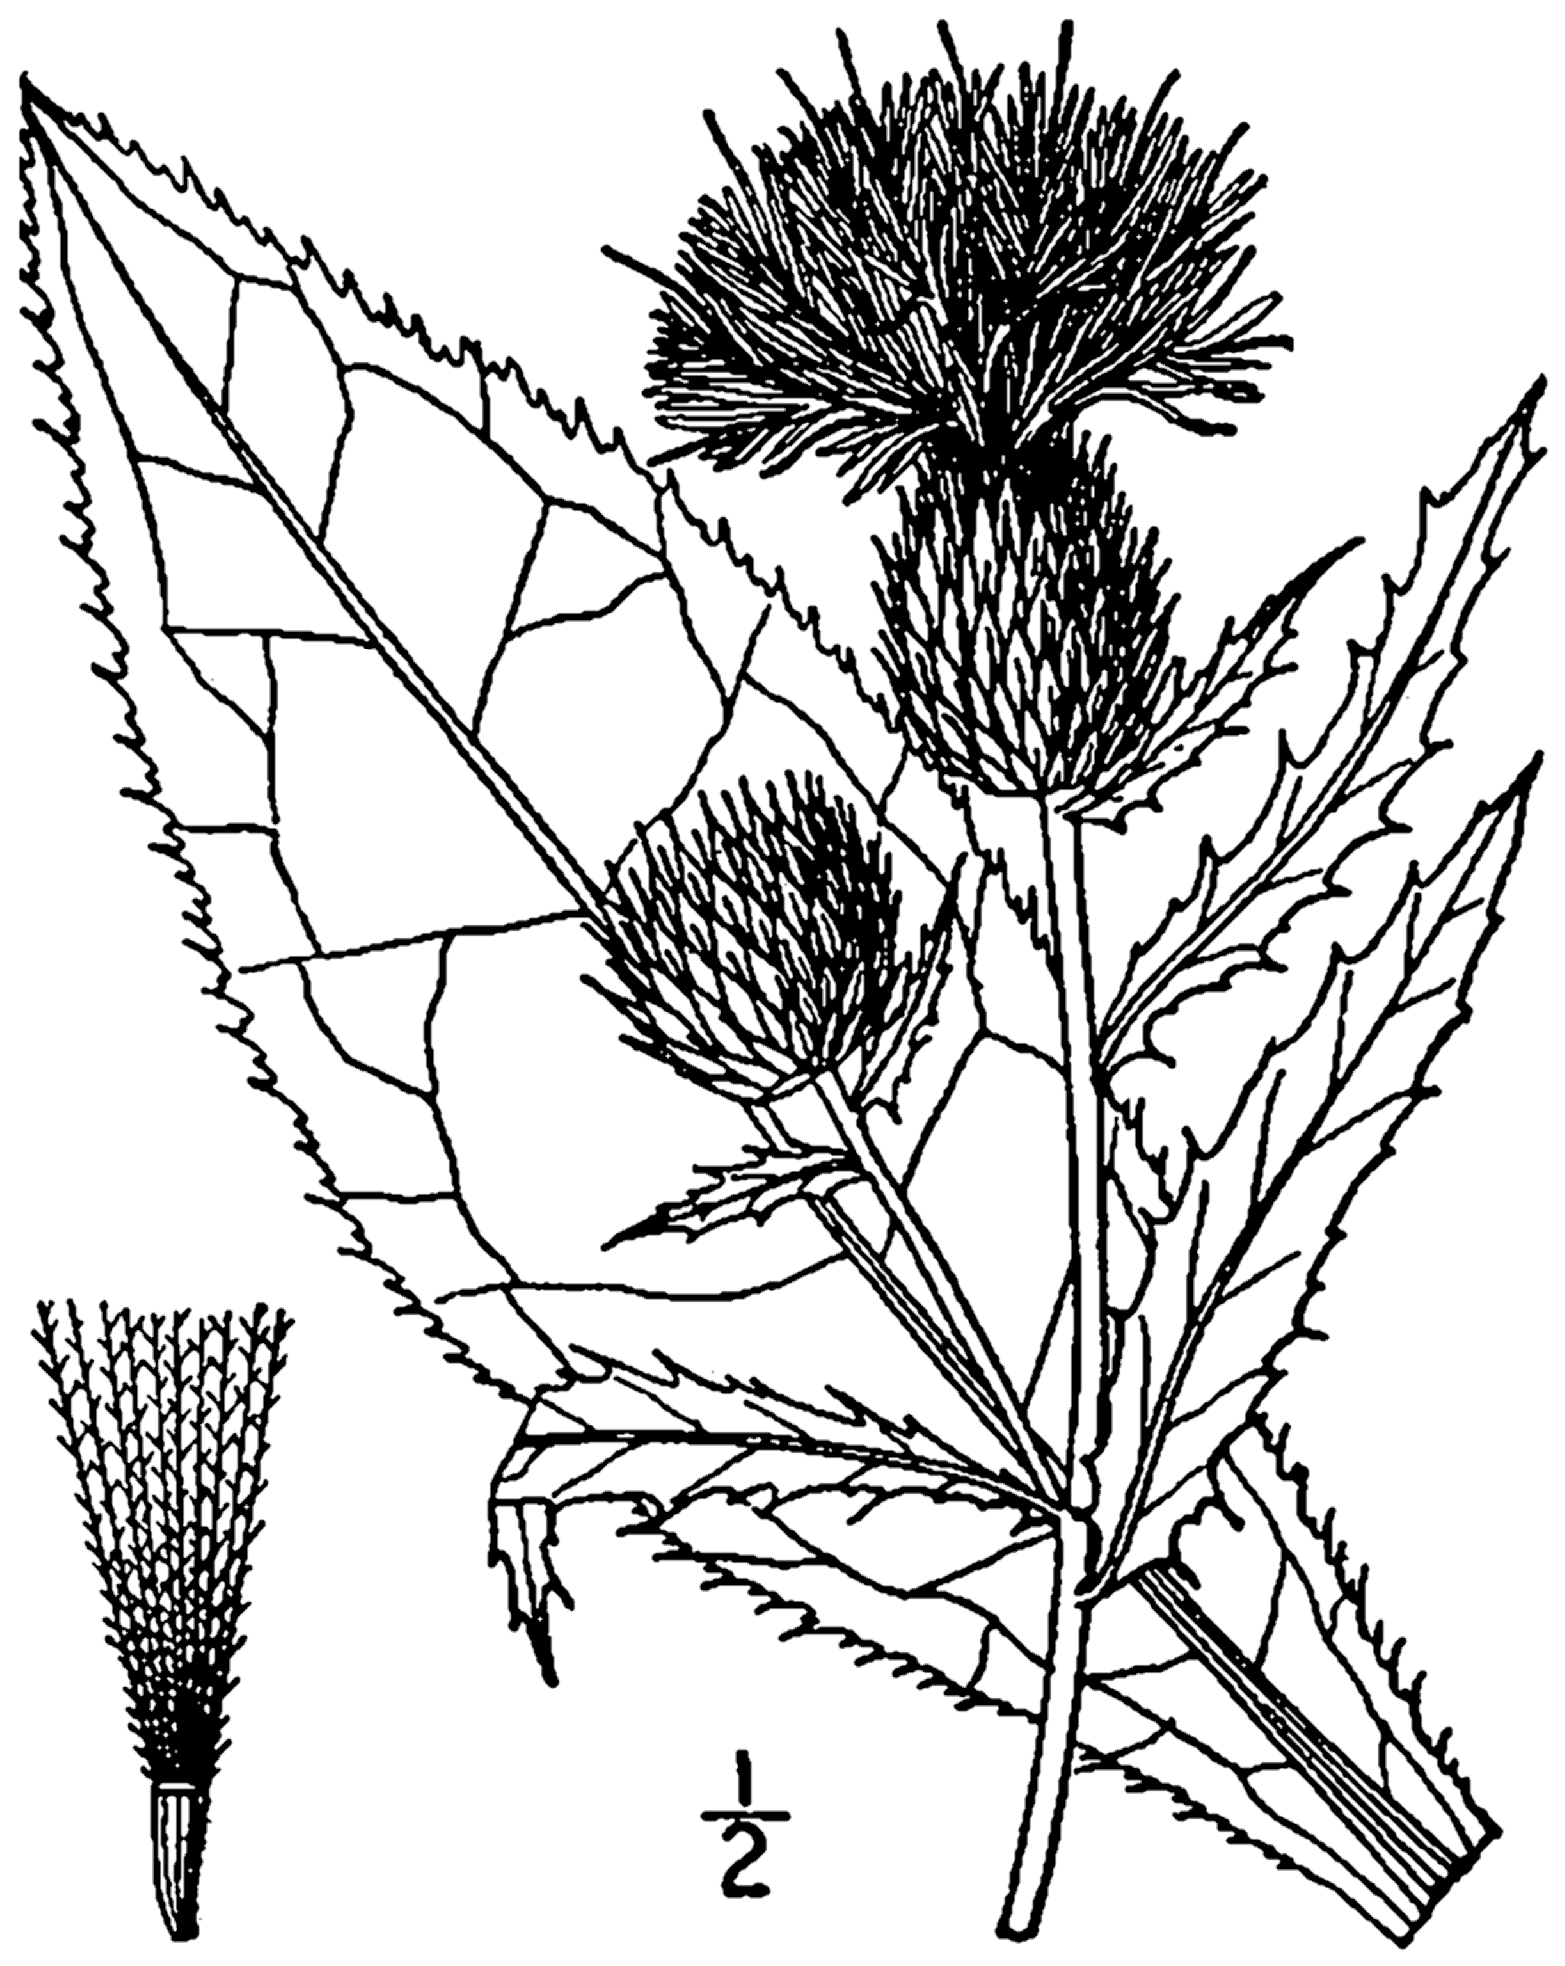 1913 Tall Thistle drawing.